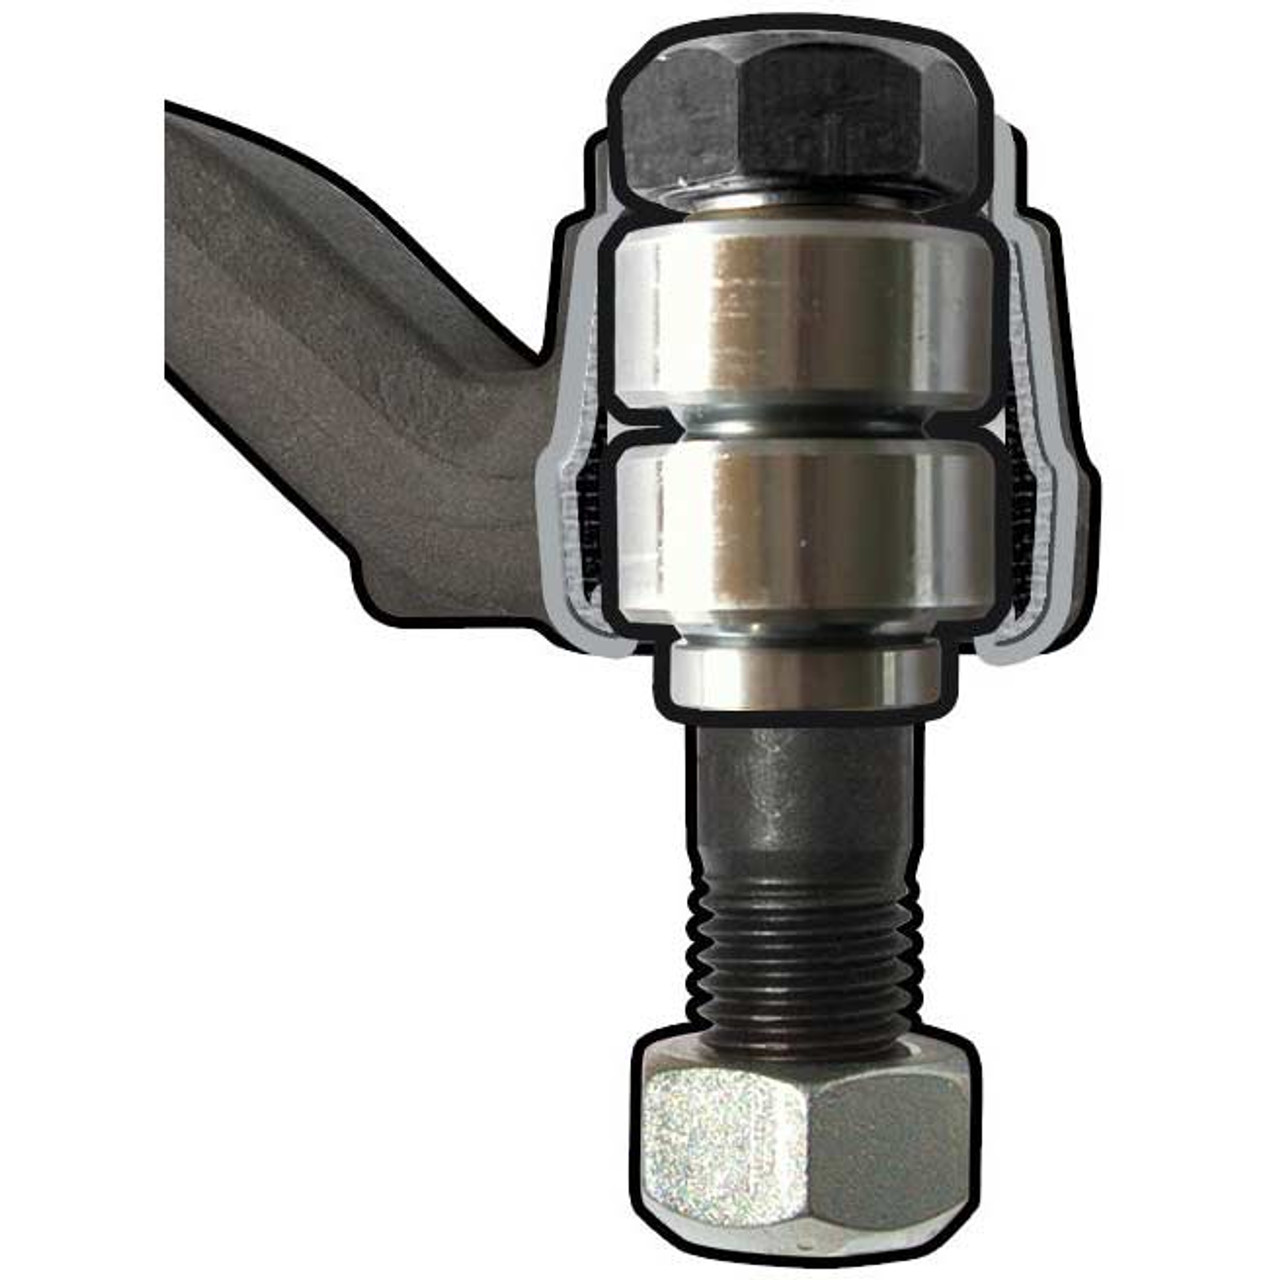 PPE EXTREME-DUTY FORGED PITMAN ARM 2001-2010 GM 2500HD/3500HD (PPE158050000) HD View